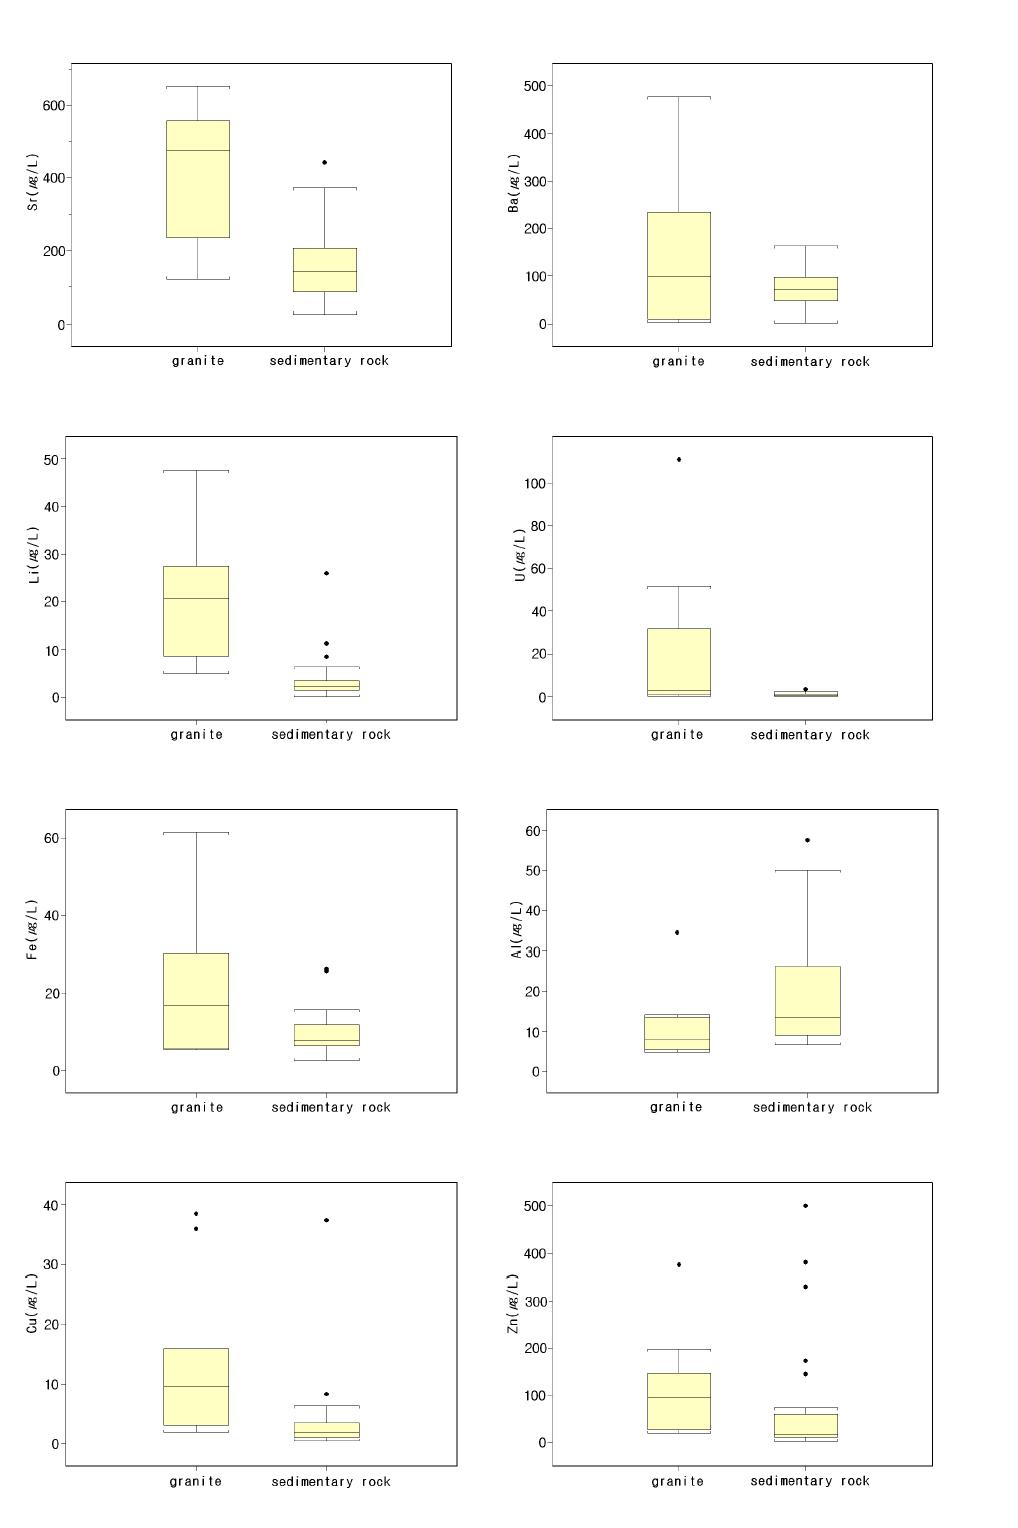 Box-W hisker diagrams showing the comparative statistical values of trace elemental composition for groundw ater samples.